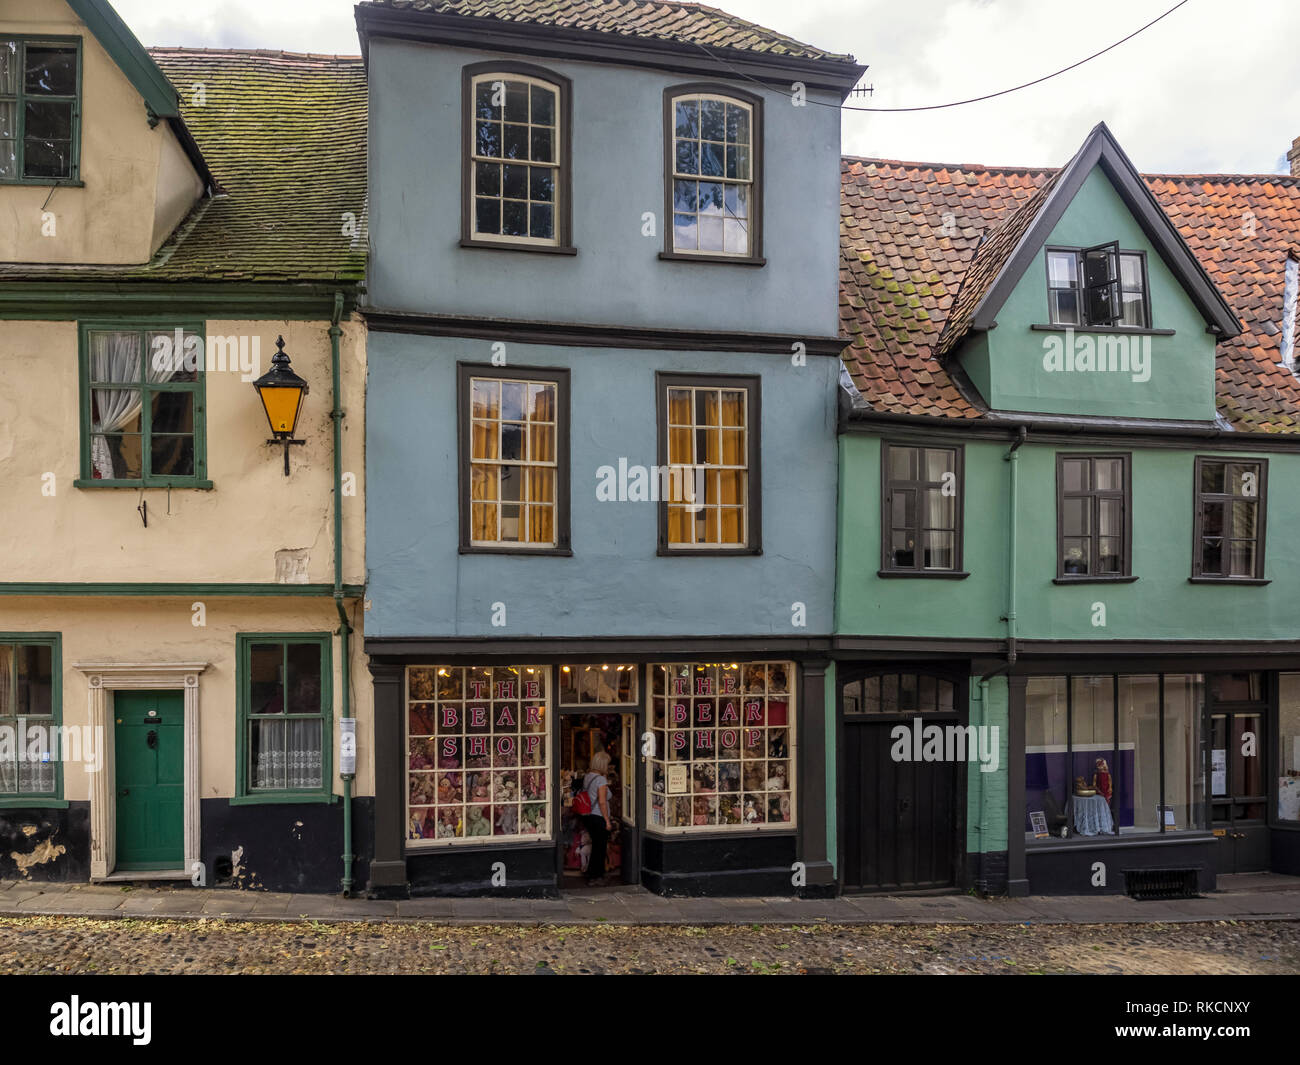 NORWICH, NORFOLK, UK - JUNE 13, 2018:  Exterior view of houses on Elm Hill, a cobbled lane in the City Centre Stock Photo